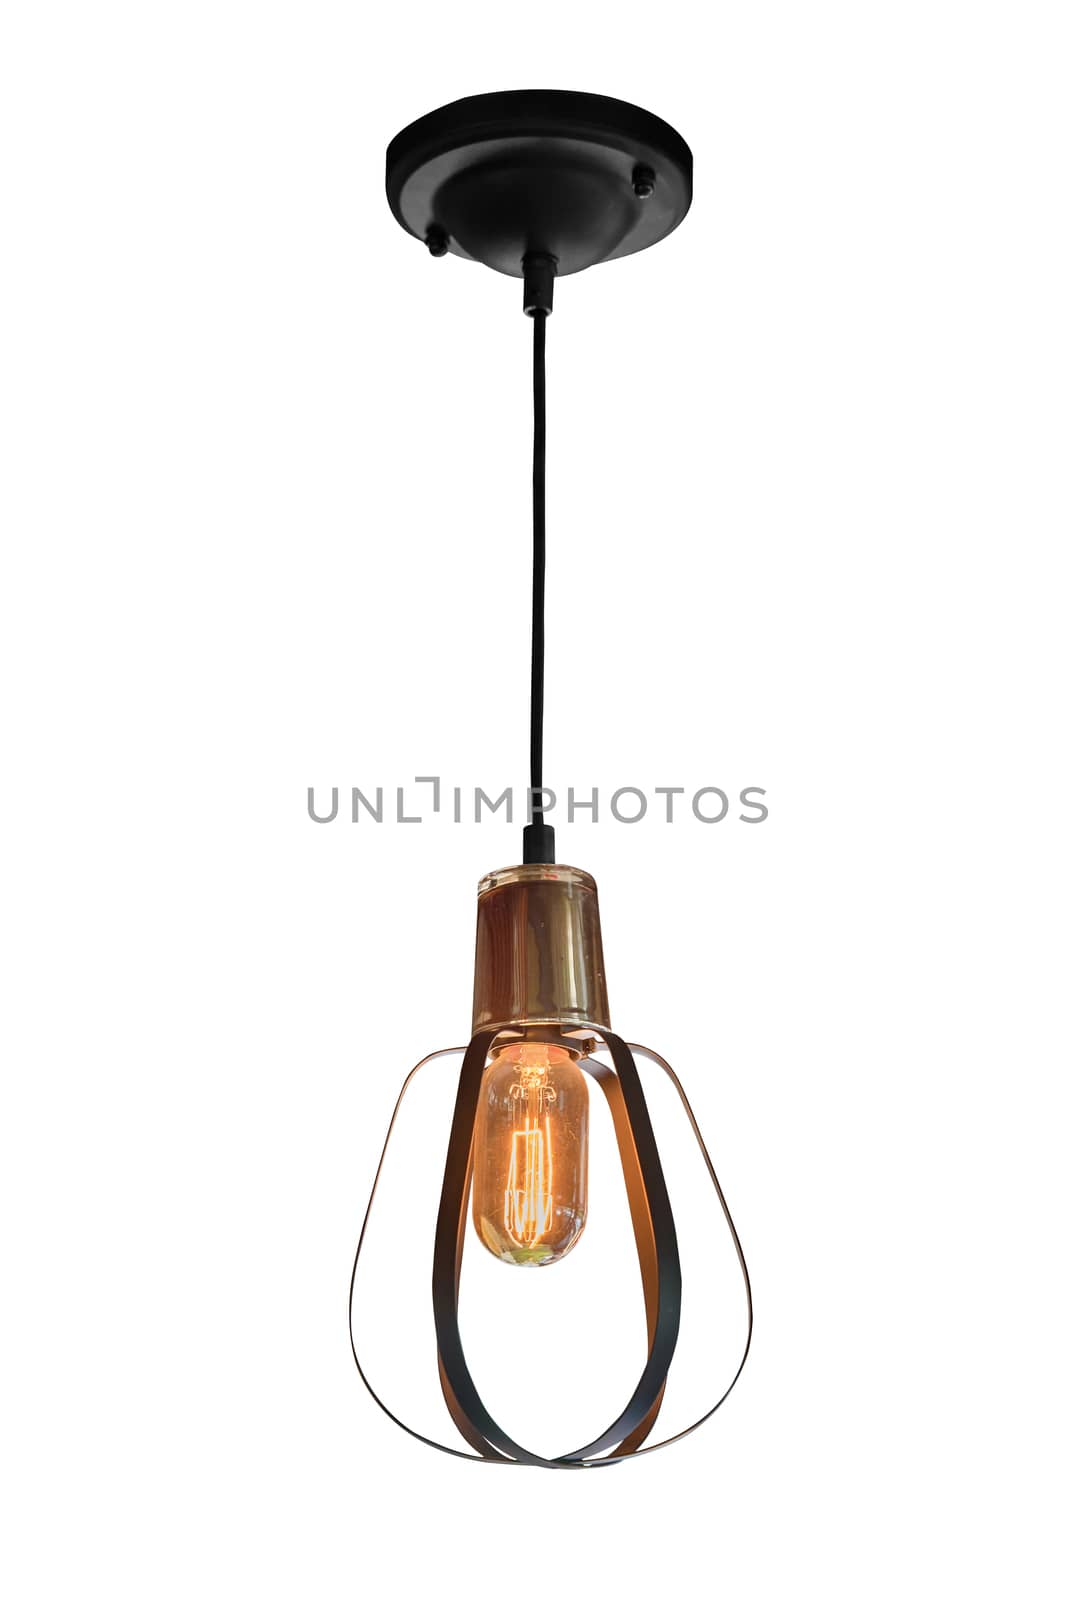 Modern hanging lamp isolated on white background, with clipping path.